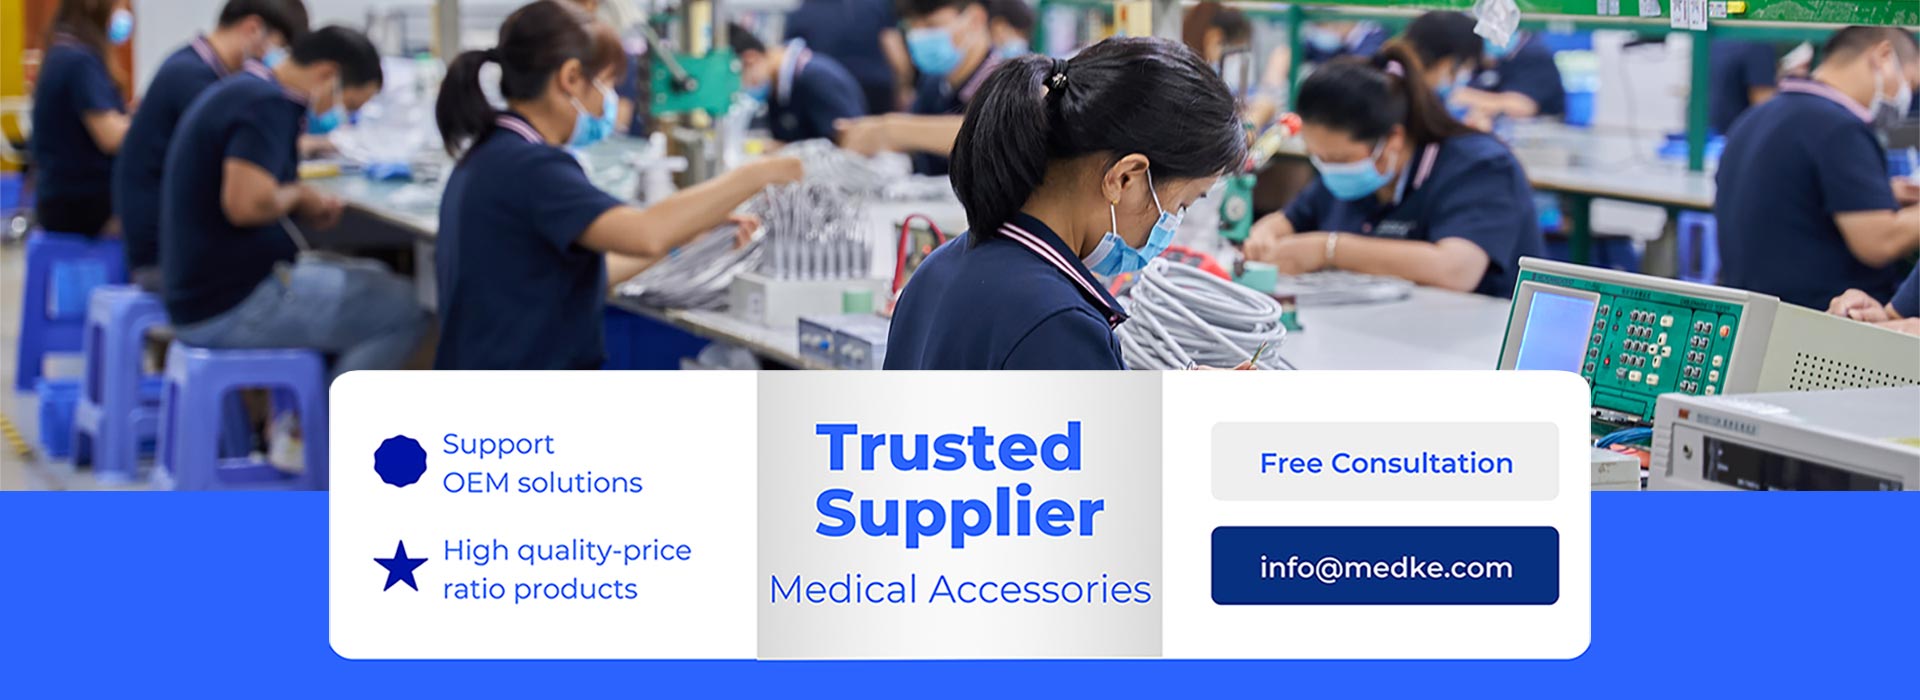 Trusted Supplier-全球搜 banner_1920×700